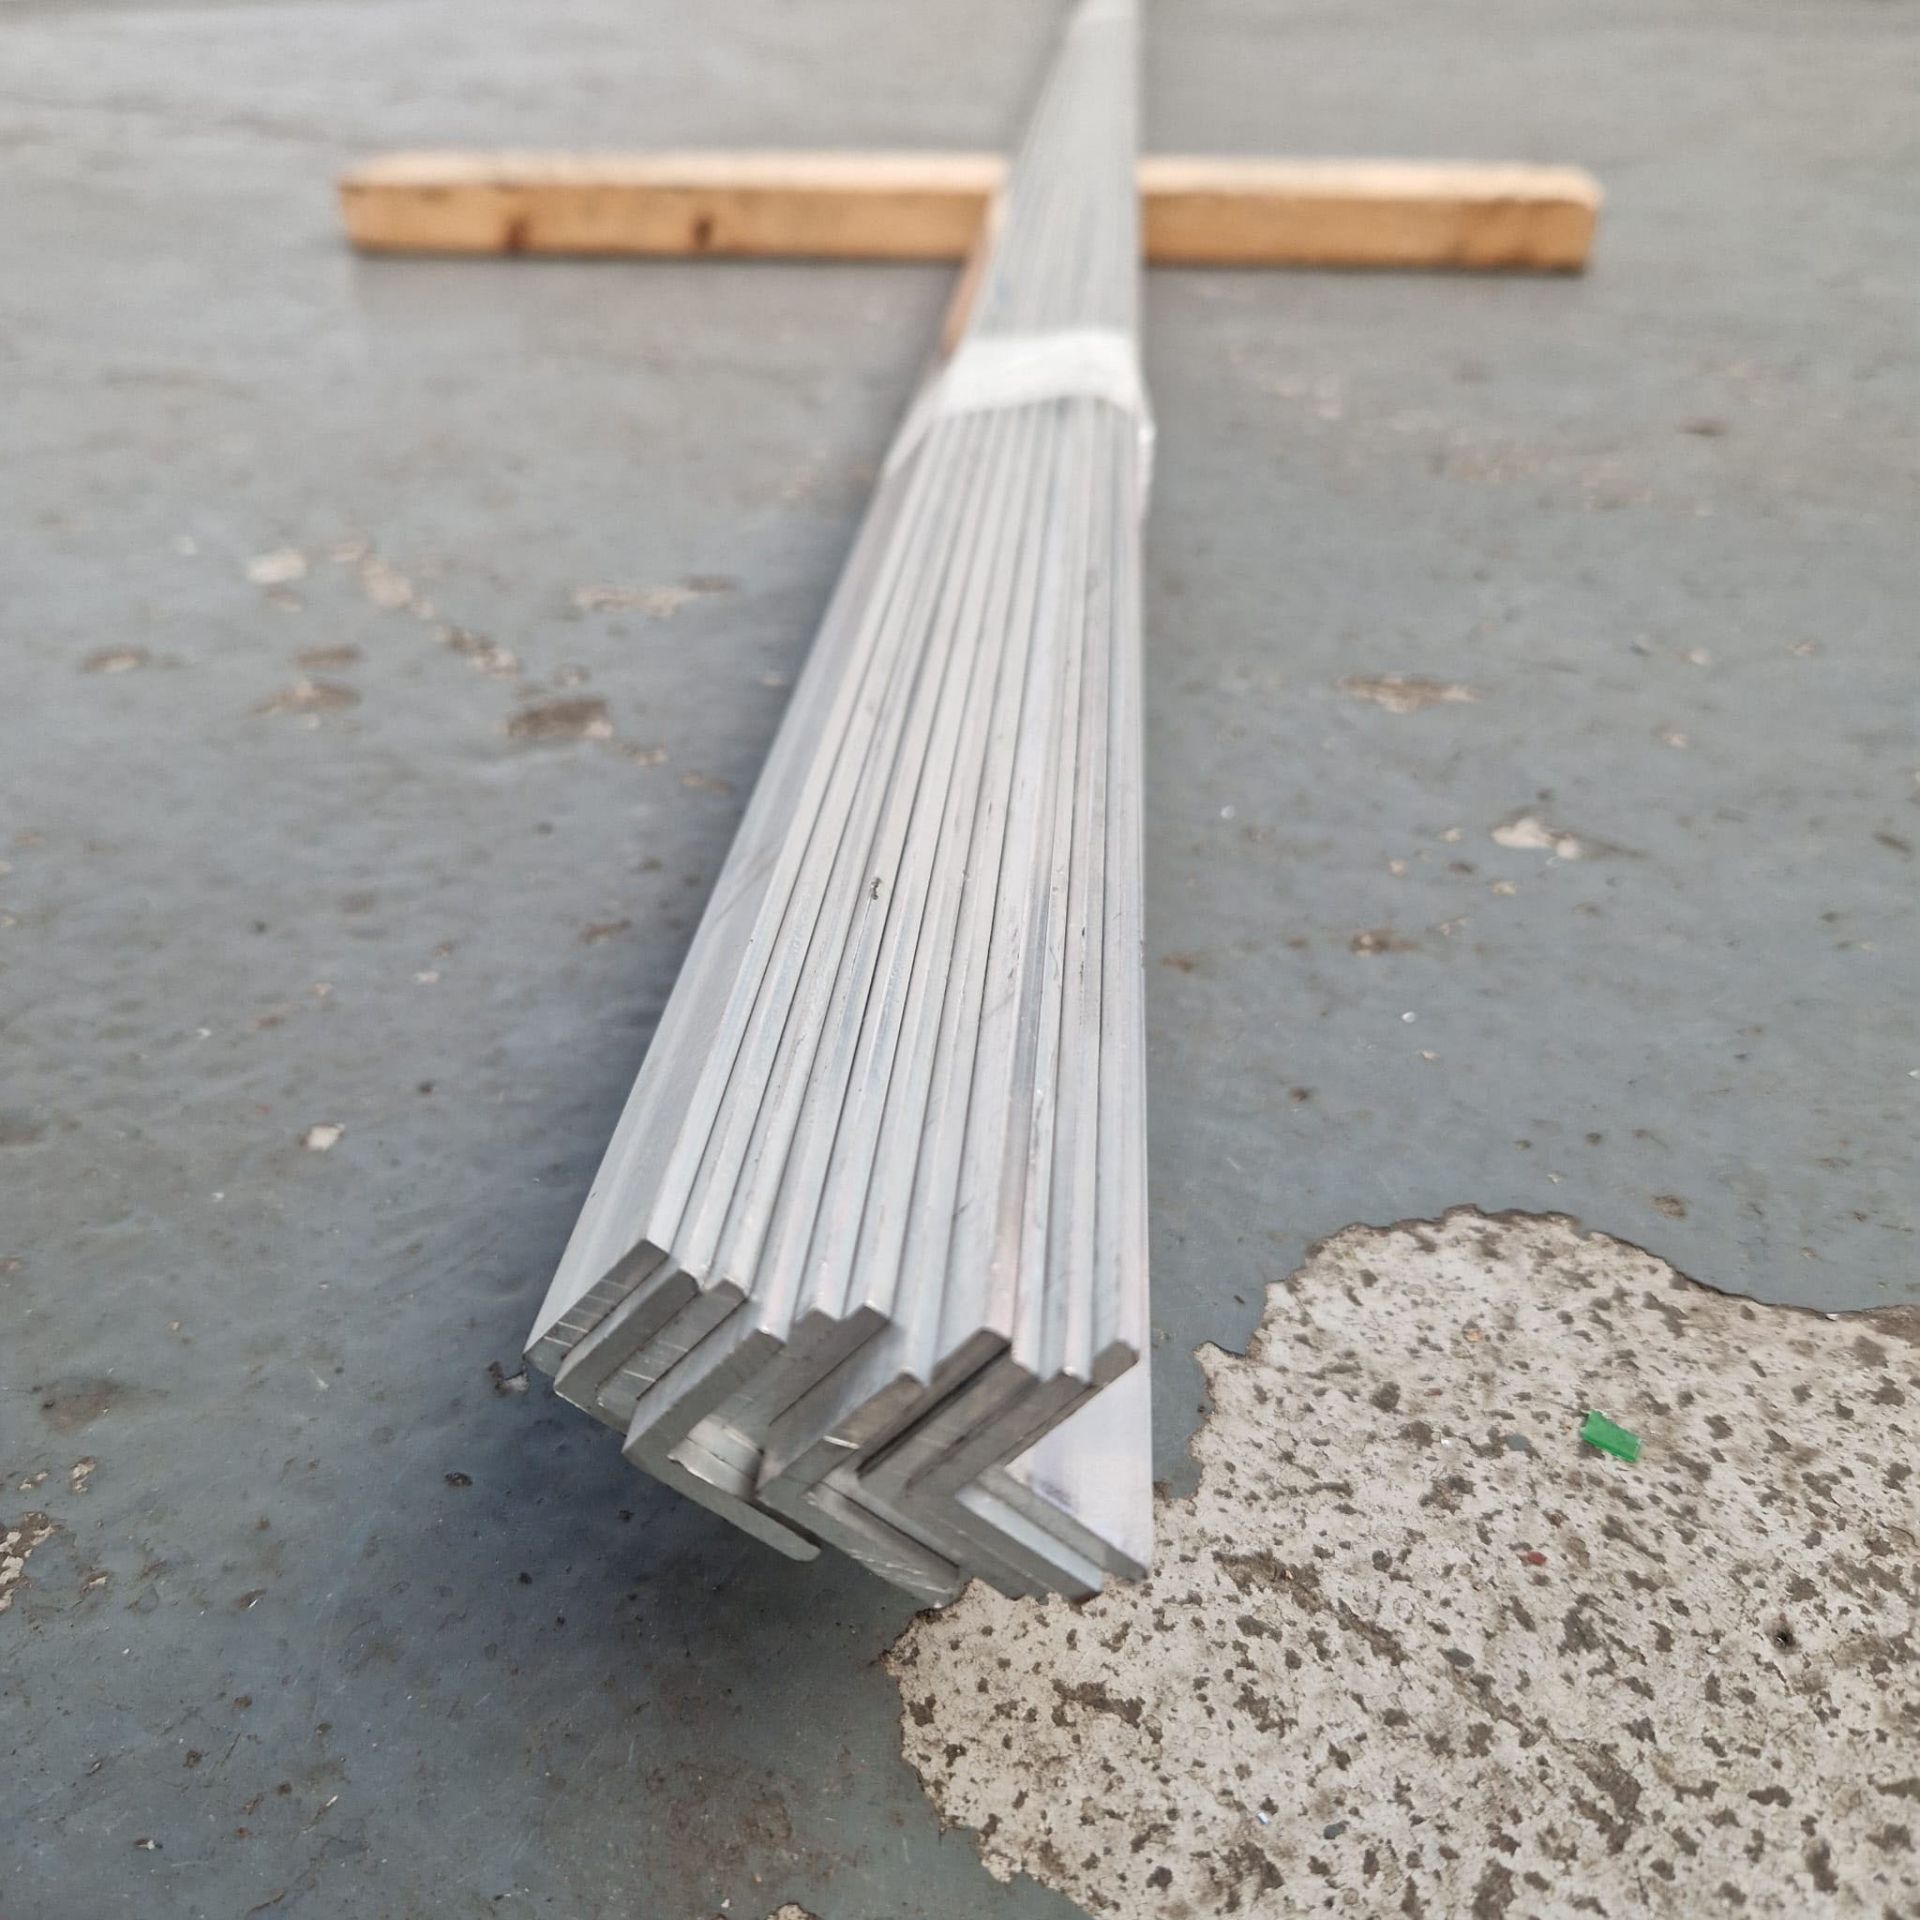 11 x Lengths of Aluminium 'L' Shape Angle Plate. Length: 5000mm. Dimensions: 22 x 22 x 3mm. - Image 5 of 7